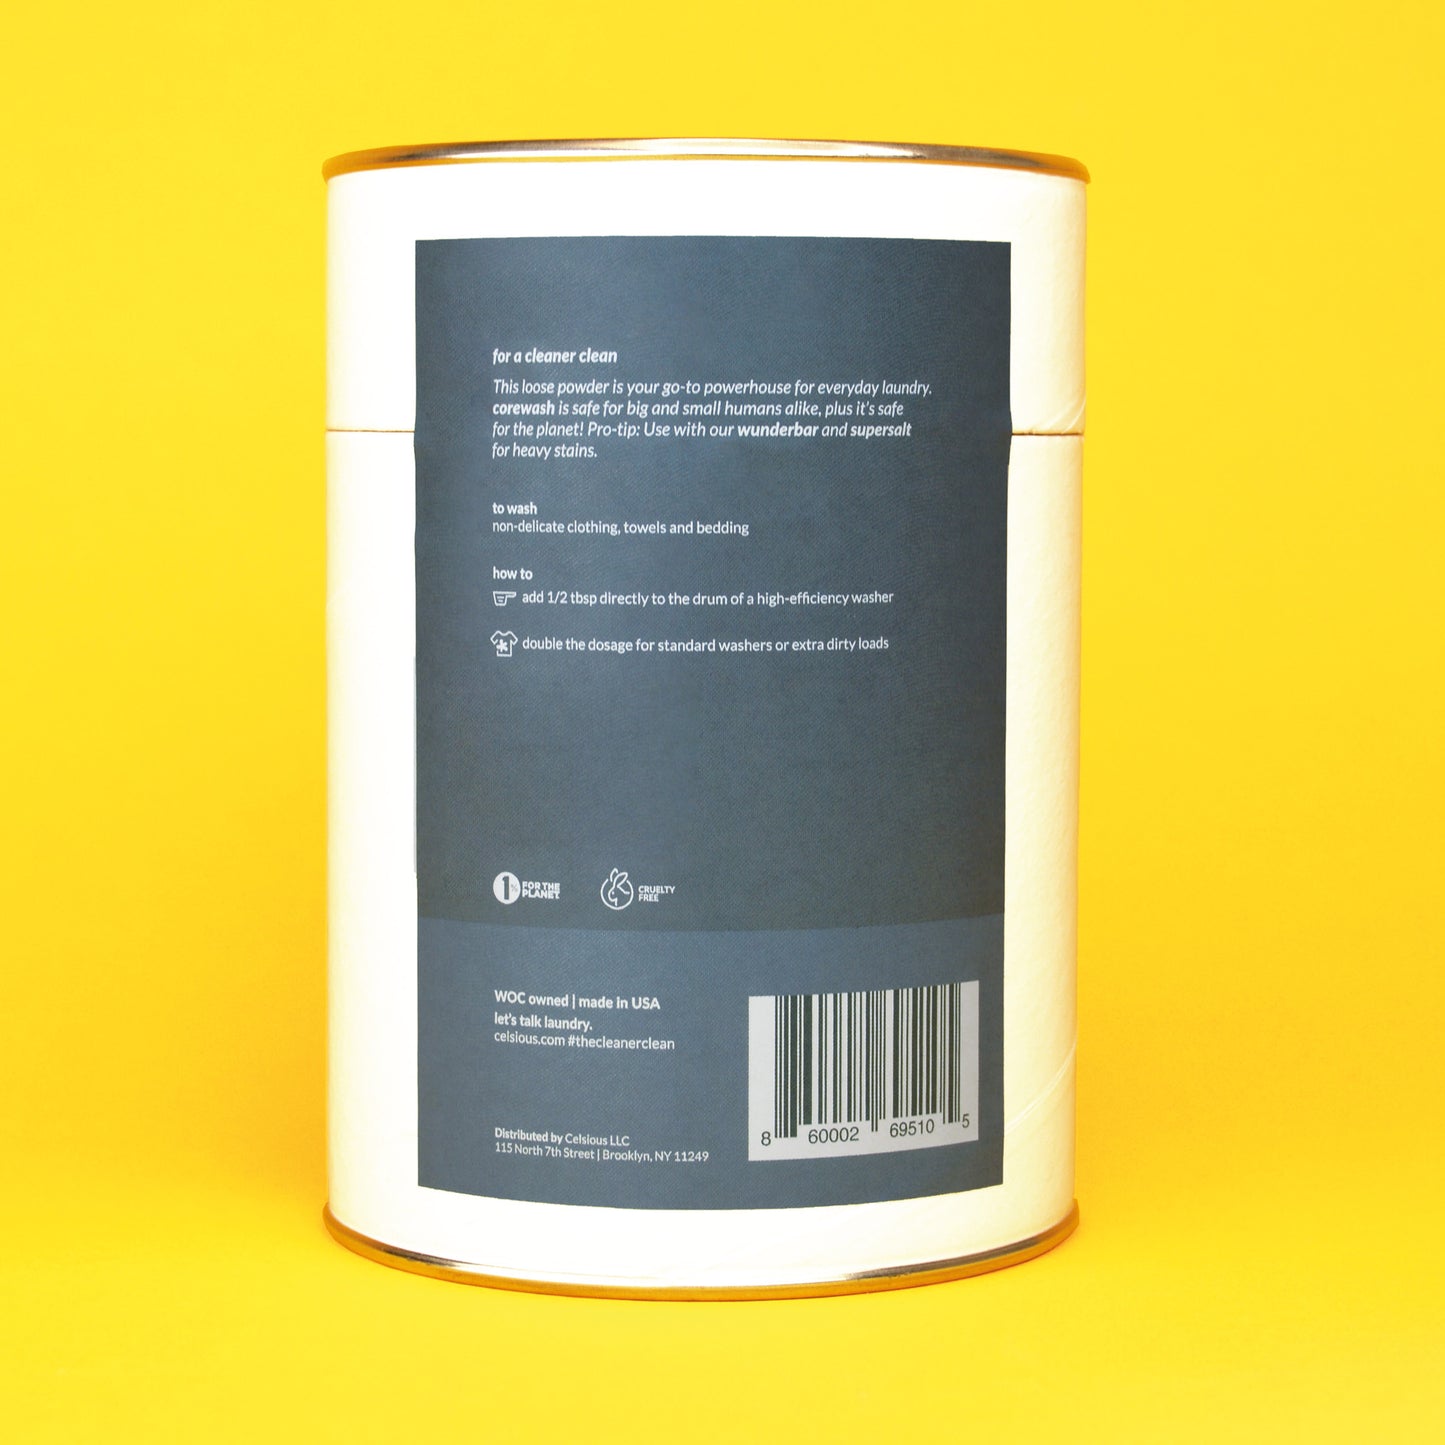 The back of a white can of unscented laundry powder by Celsious with a blue label showing usage instructions and product barcode; the can is displayed on a yellow backdrop